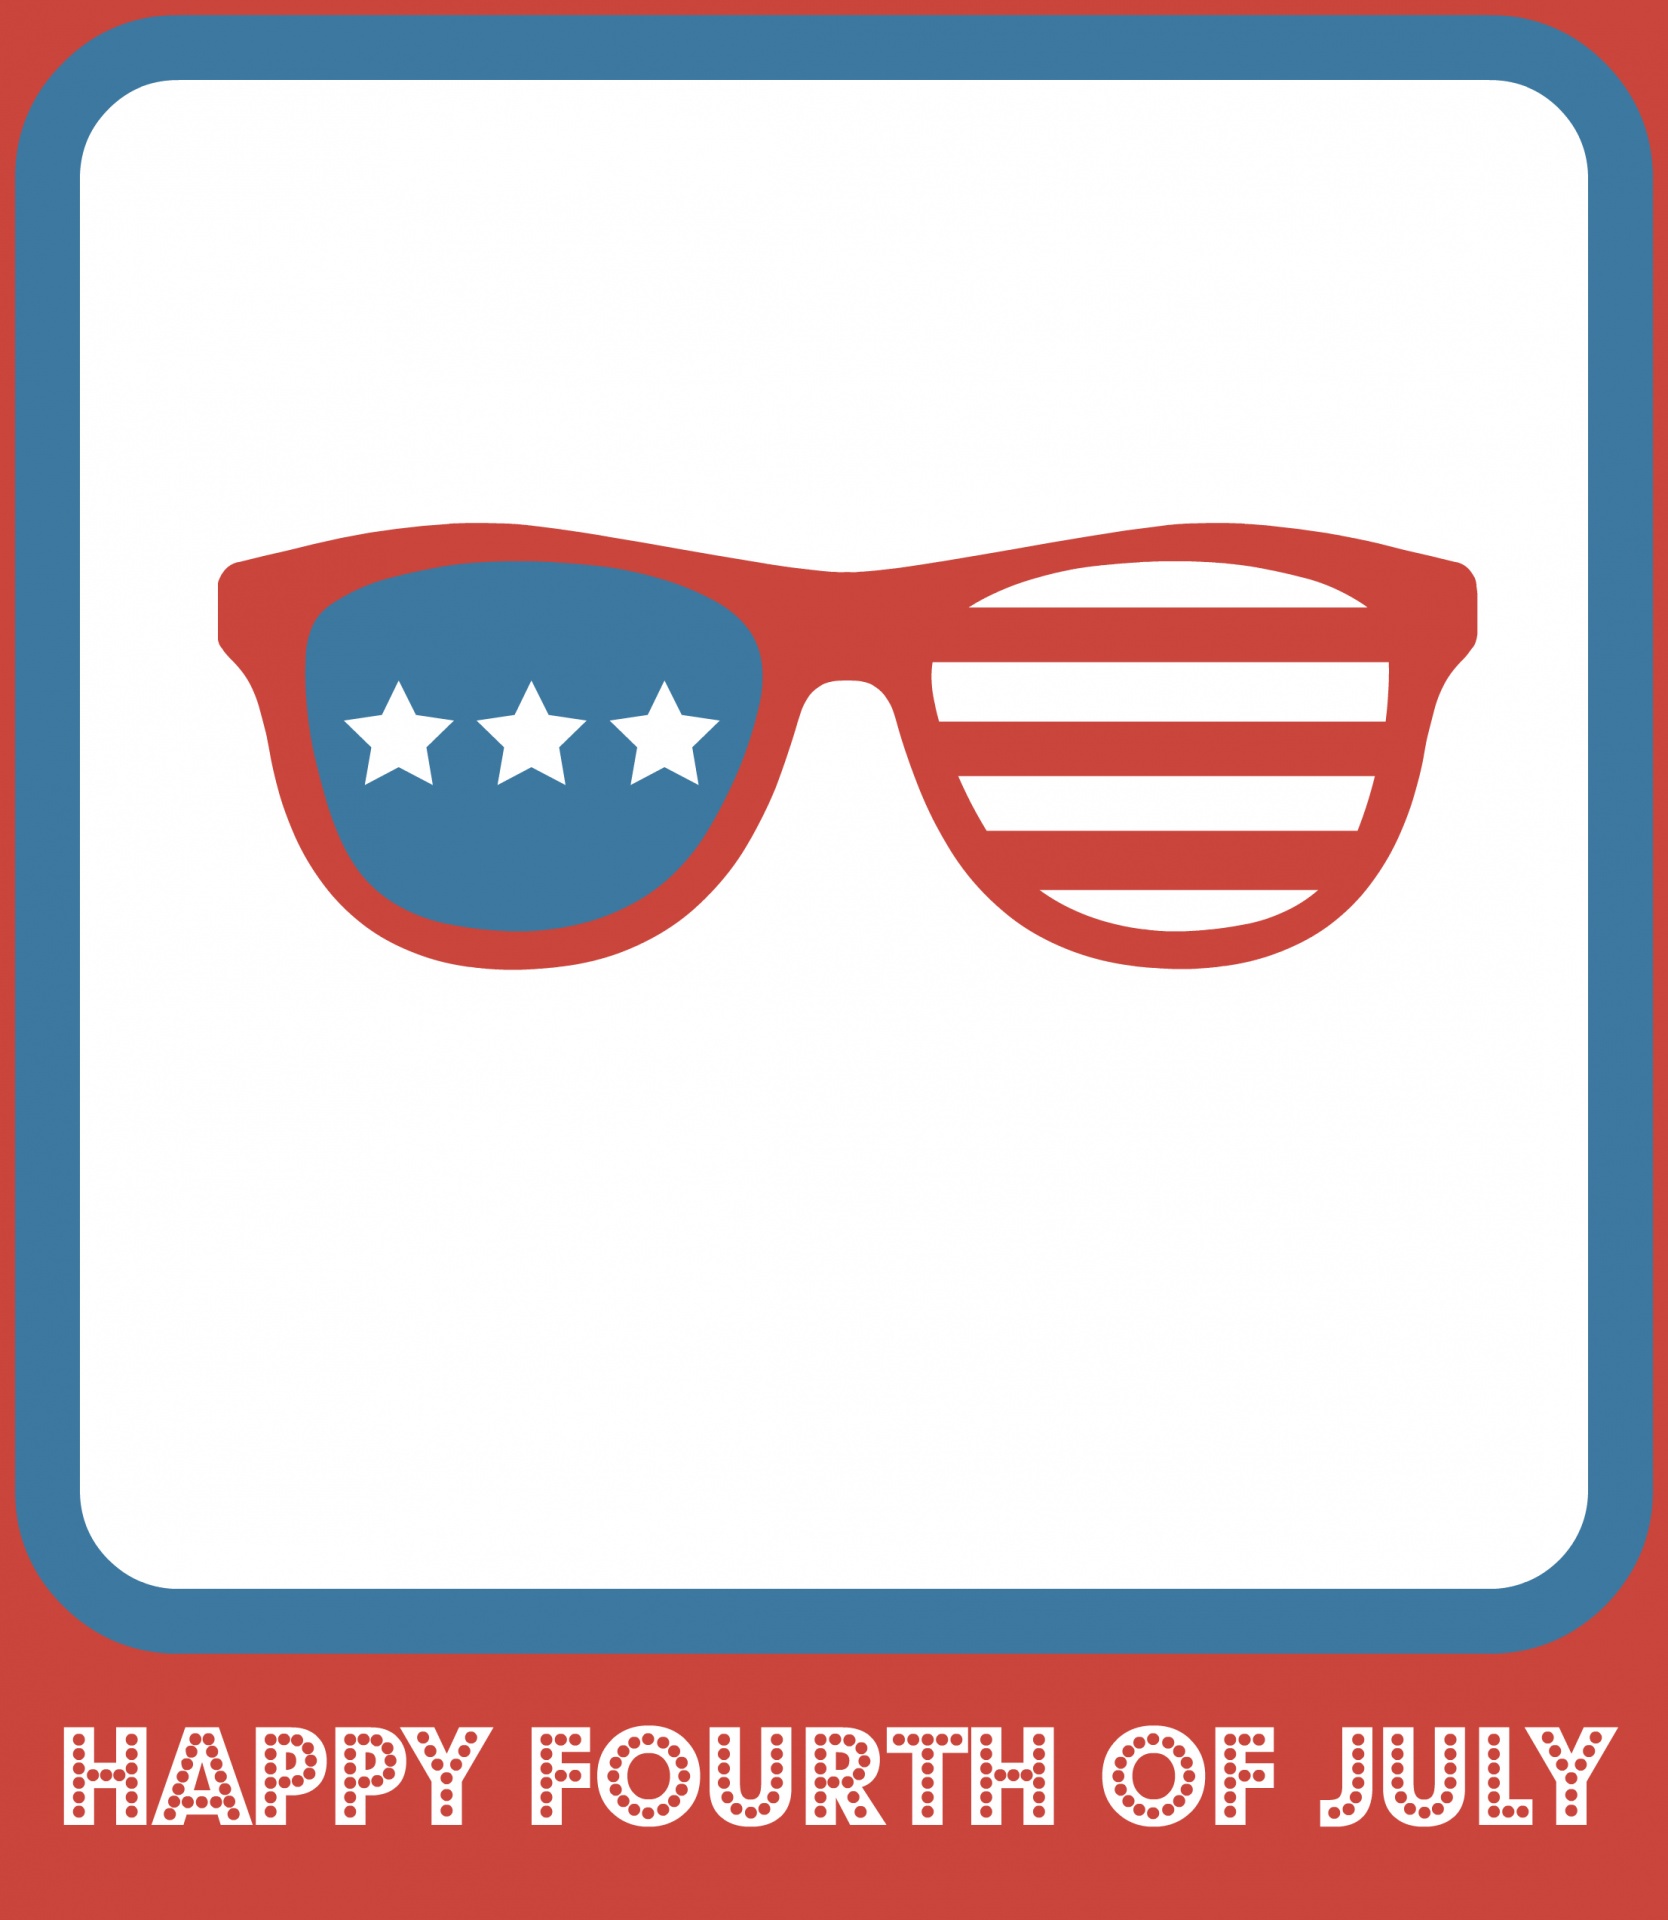 greeting card for independence day freeimage, publicdomain, CC0